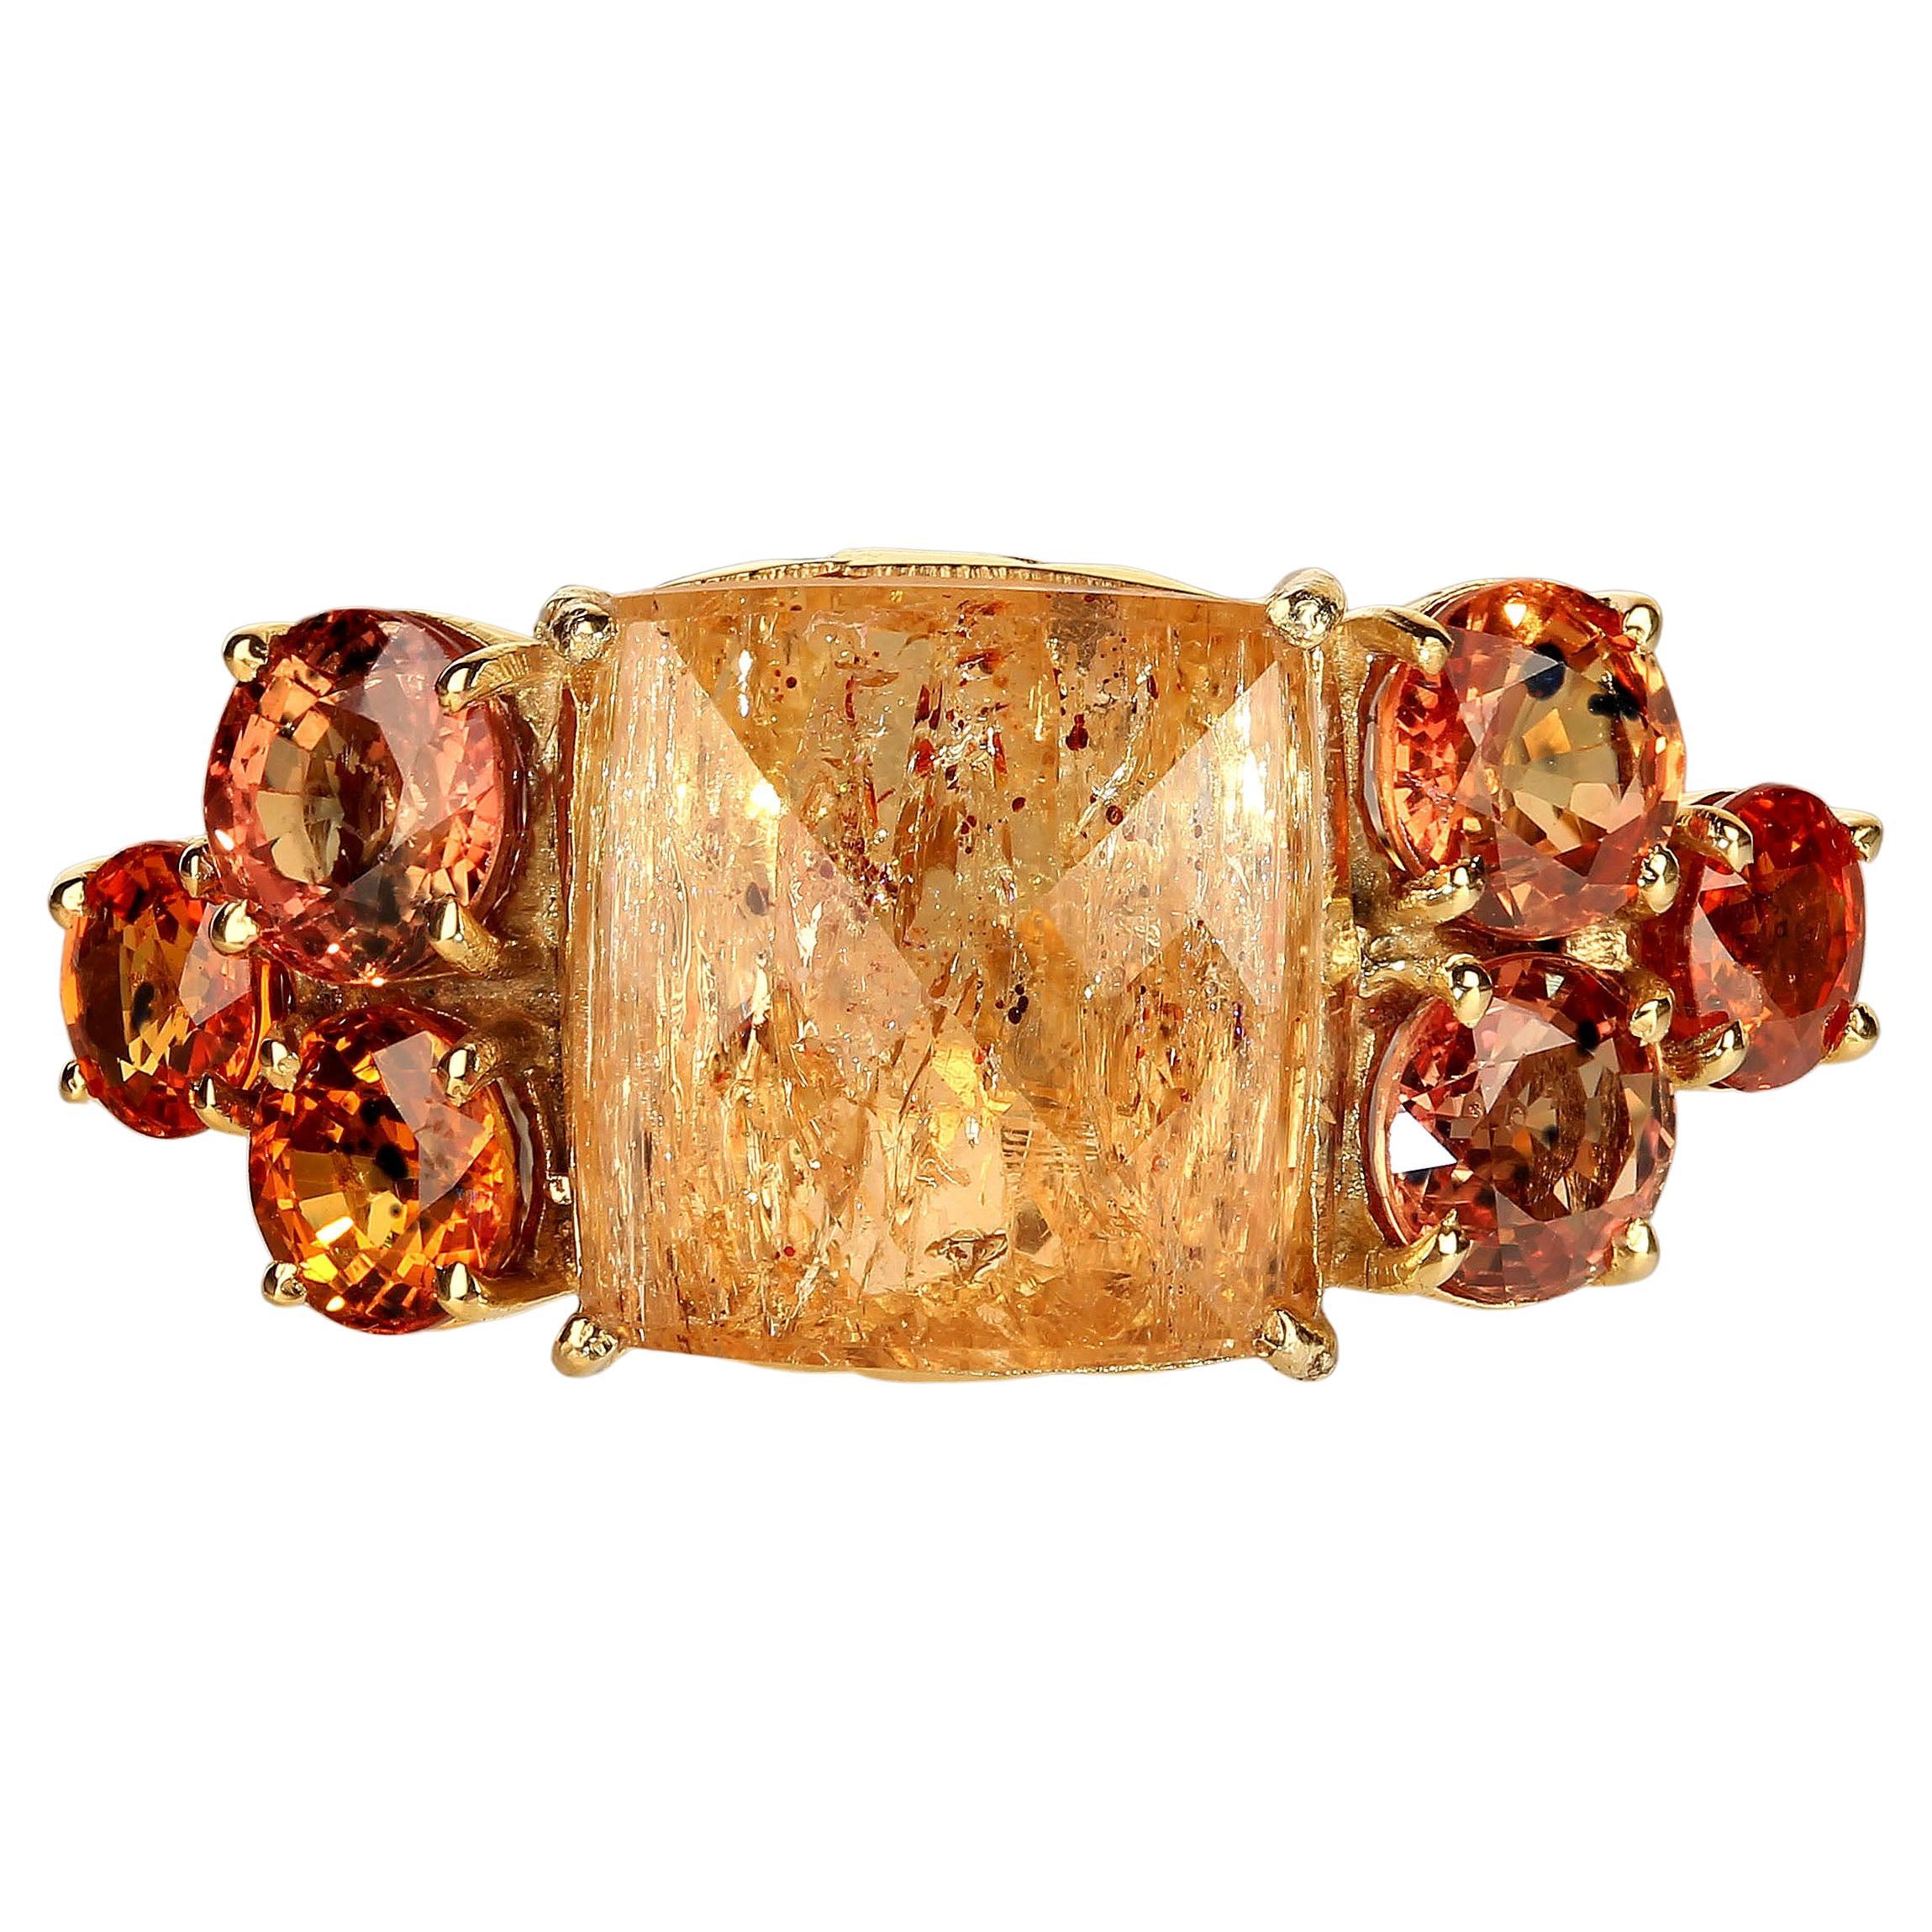 Magnificent dinner ring of golden Imperial Topaz and Orange Songea Sapphires. This one-of-a-kind bold ring is a half and inch knuckle to knuckle and more than an inch wide across your fingers.  The gemstones sparkle and dance in the light as your